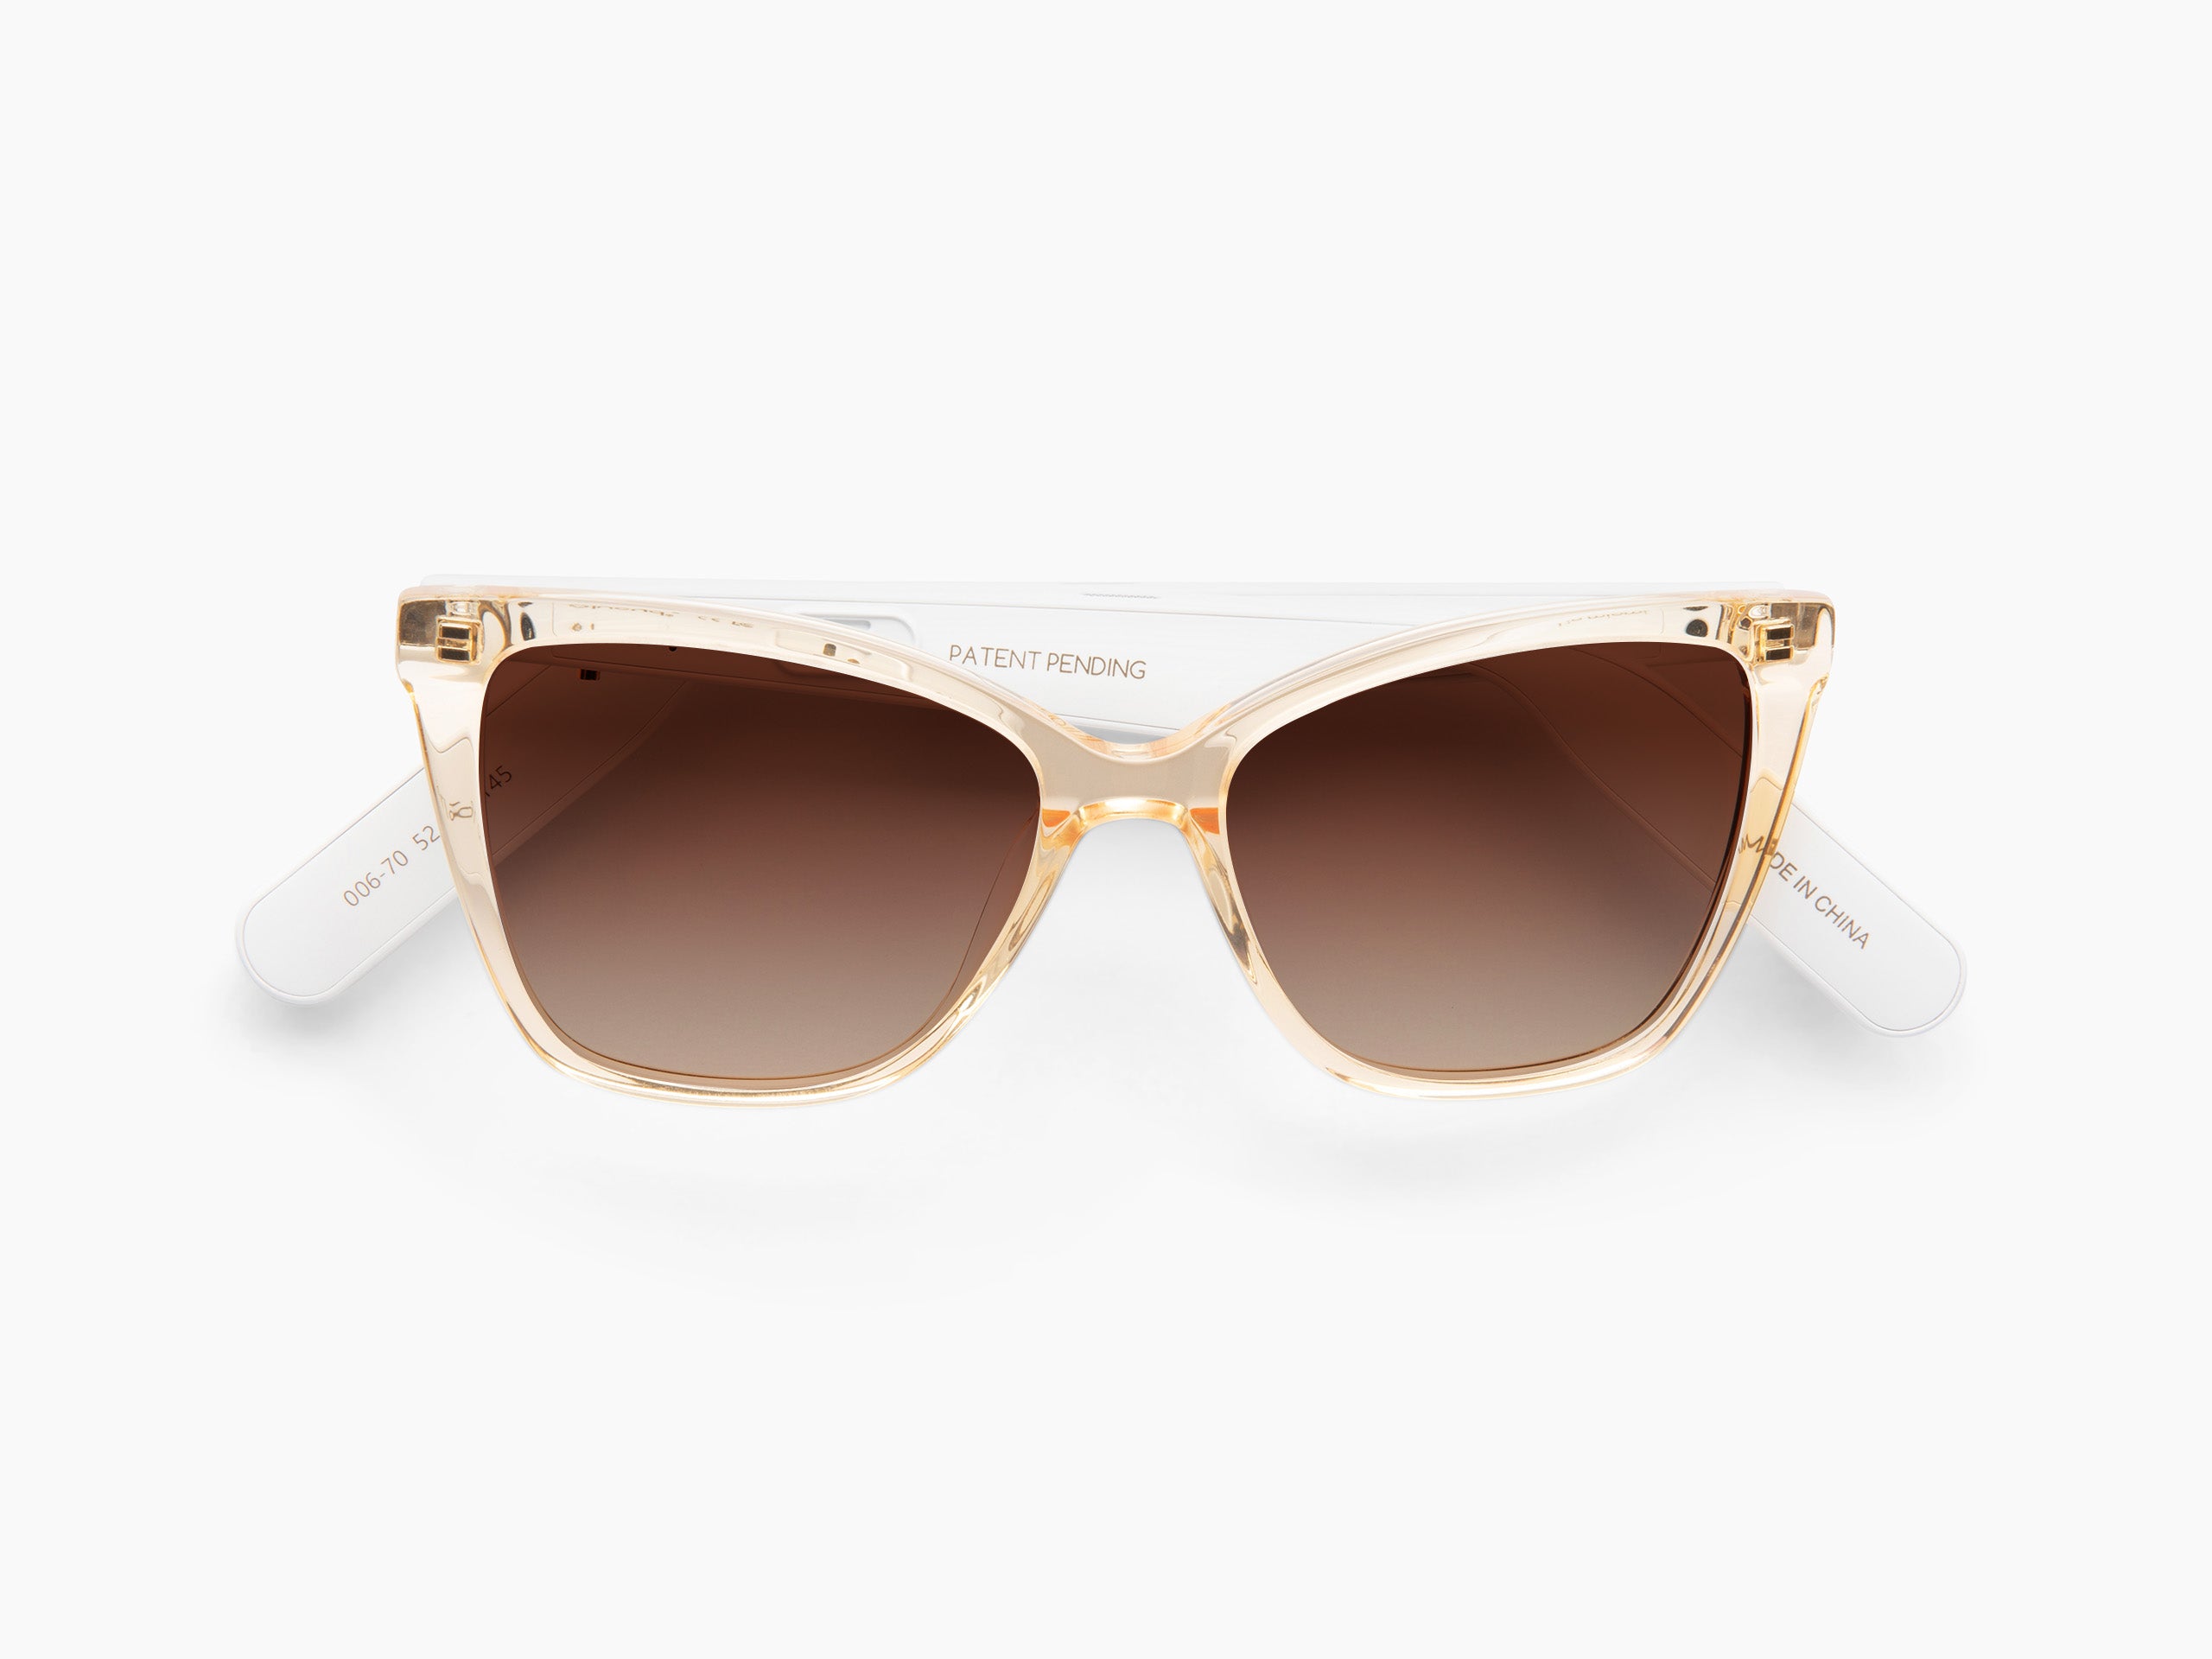 Sunglasses Collection – LUCYD EYEWEAR